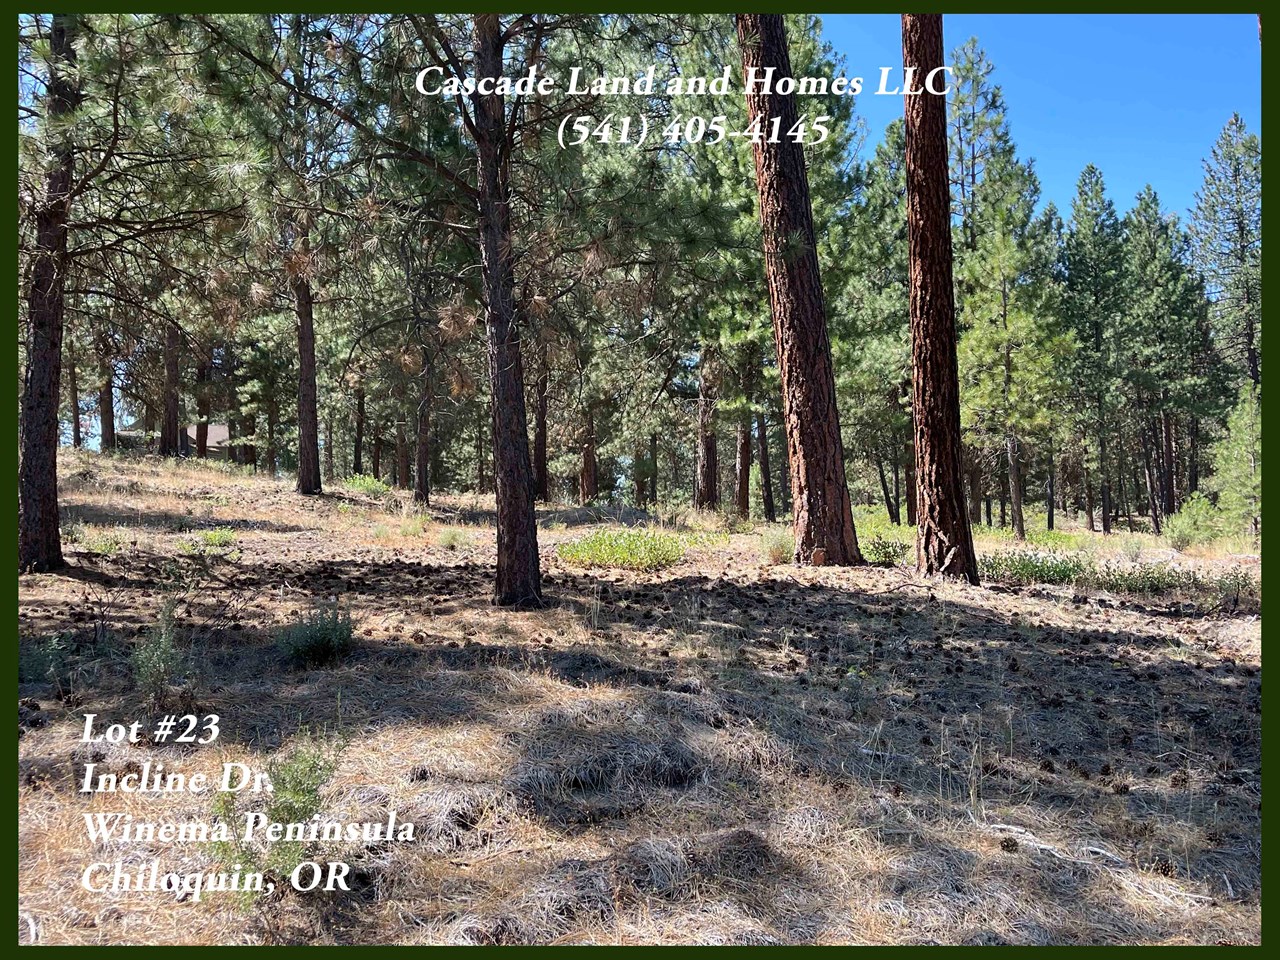 the property is heavily treed with ponderosa pines, and lodgepole pines. there are also native shrubs and grasses that cover the understory. in the spring the wildflowers are spectacular!